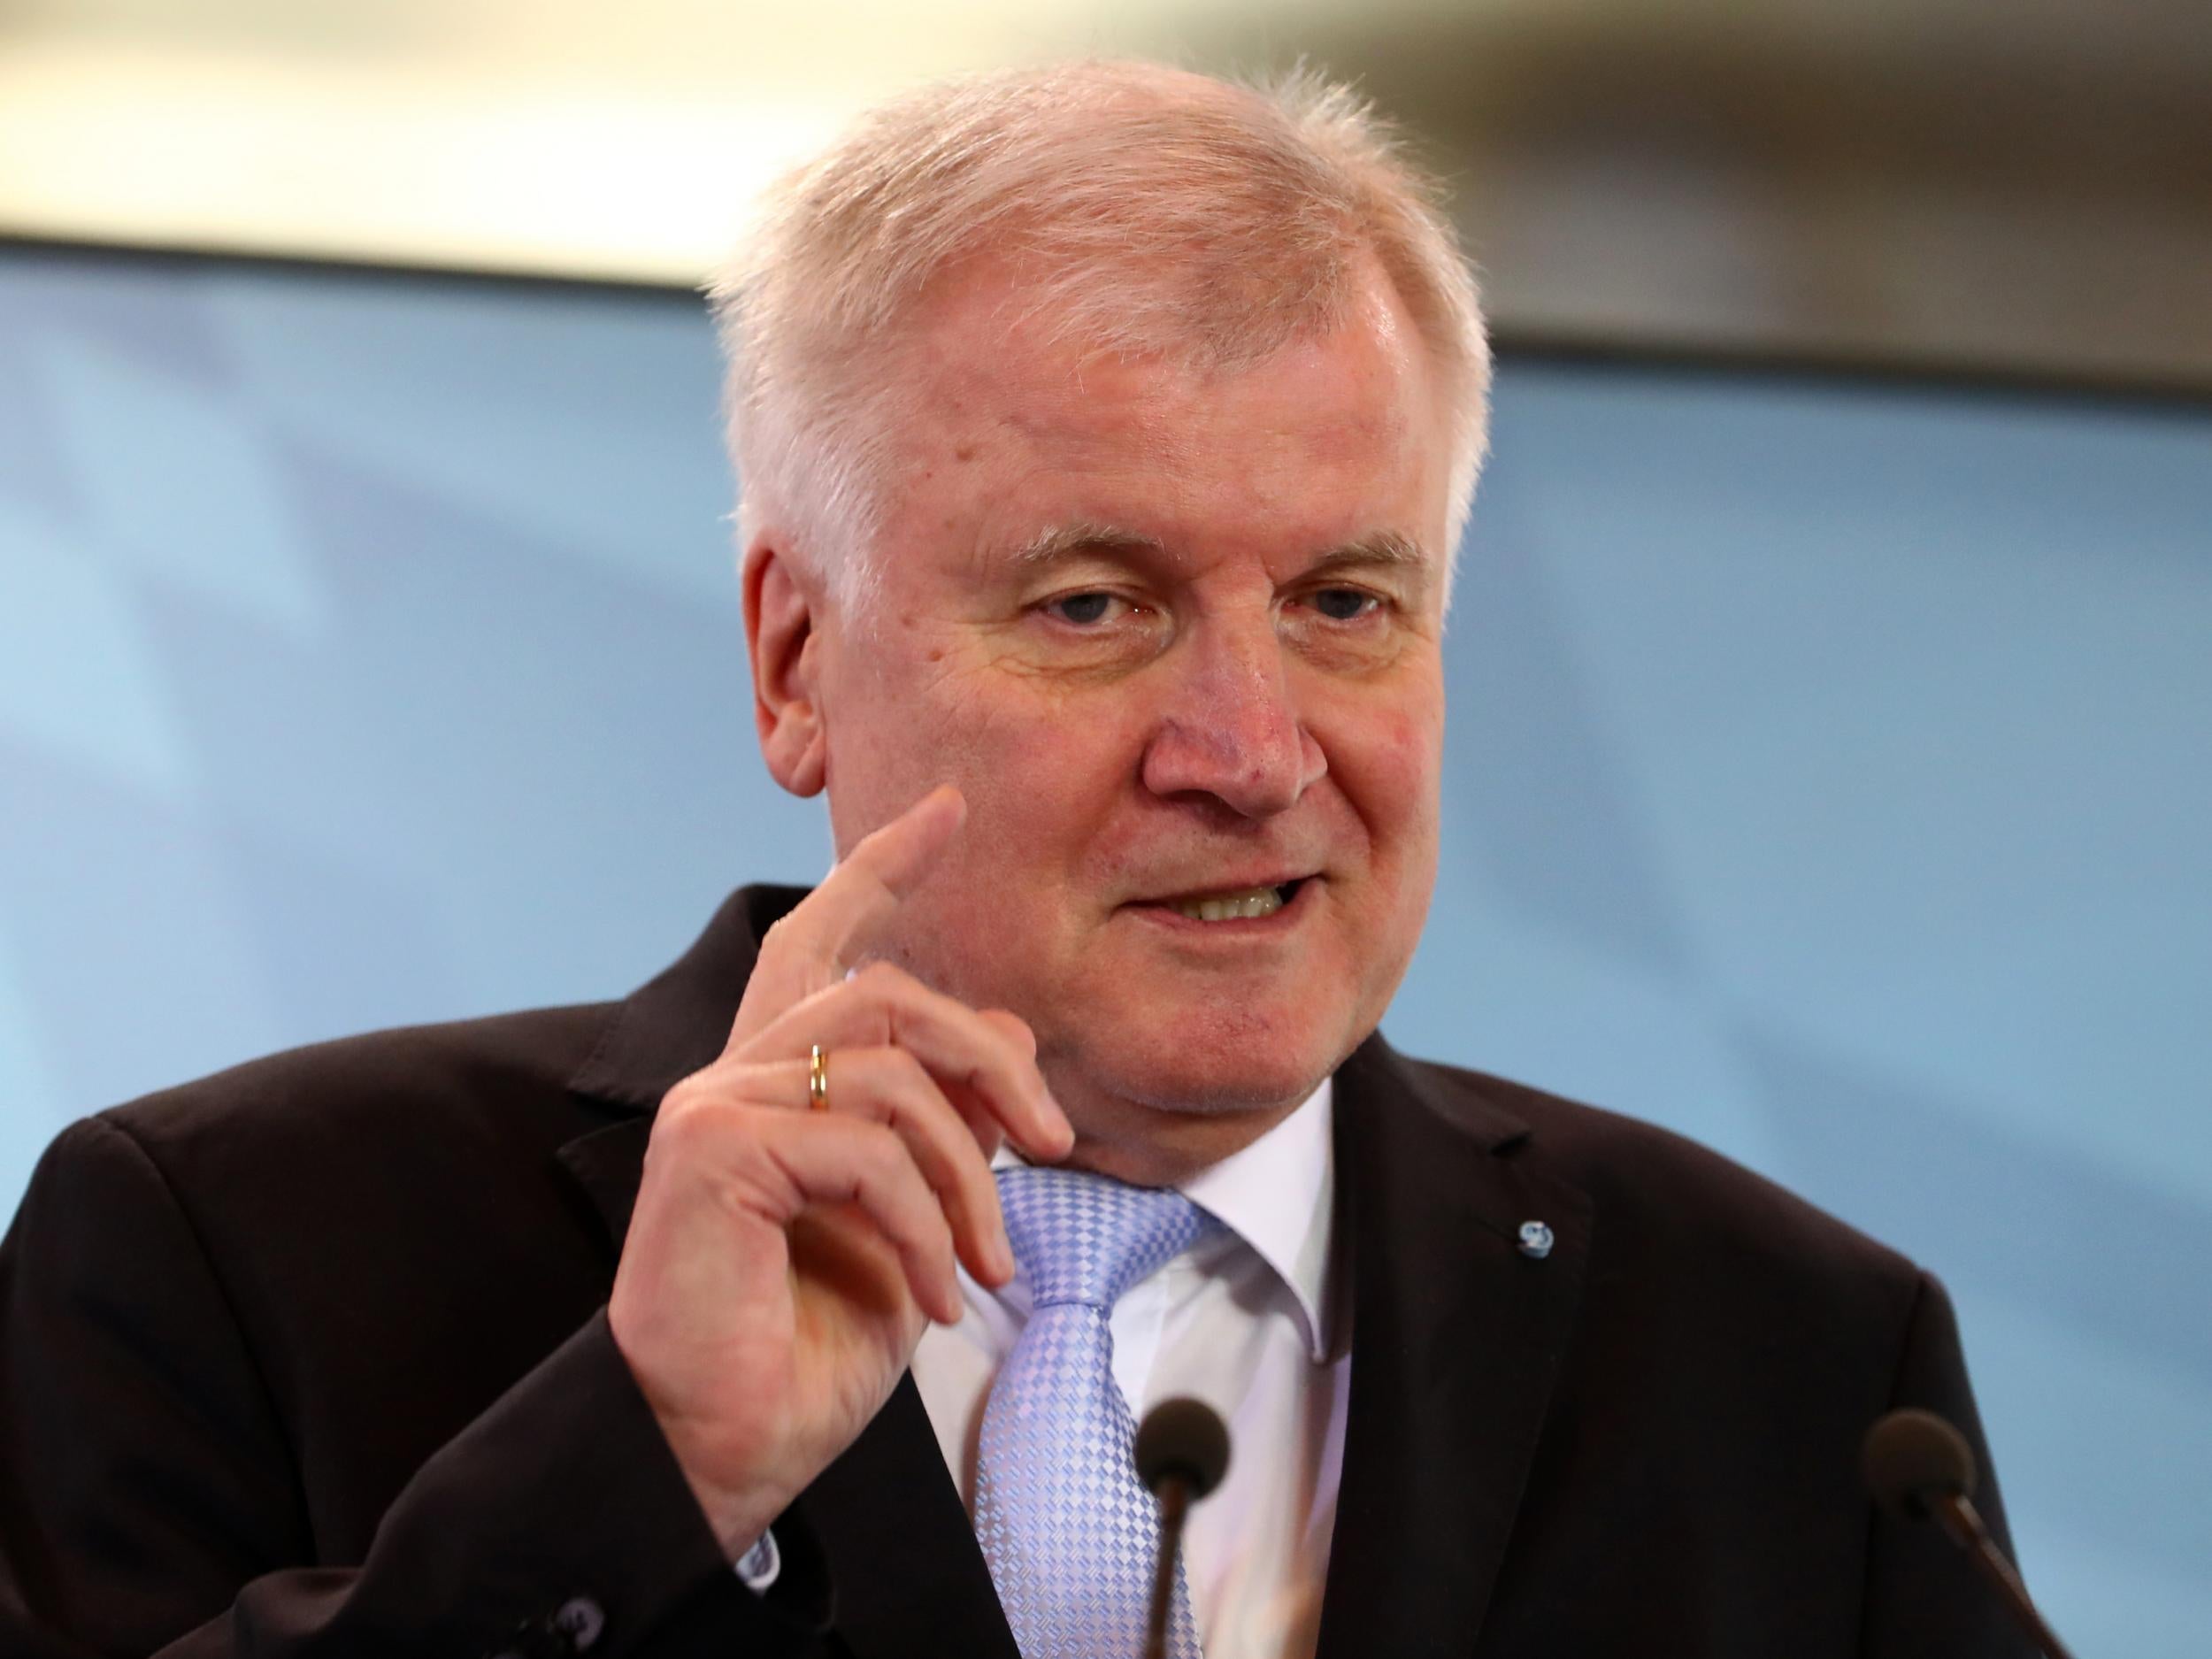 Seehofer made the comments as Merkel’s new coalition combats a rising challenge from the far right